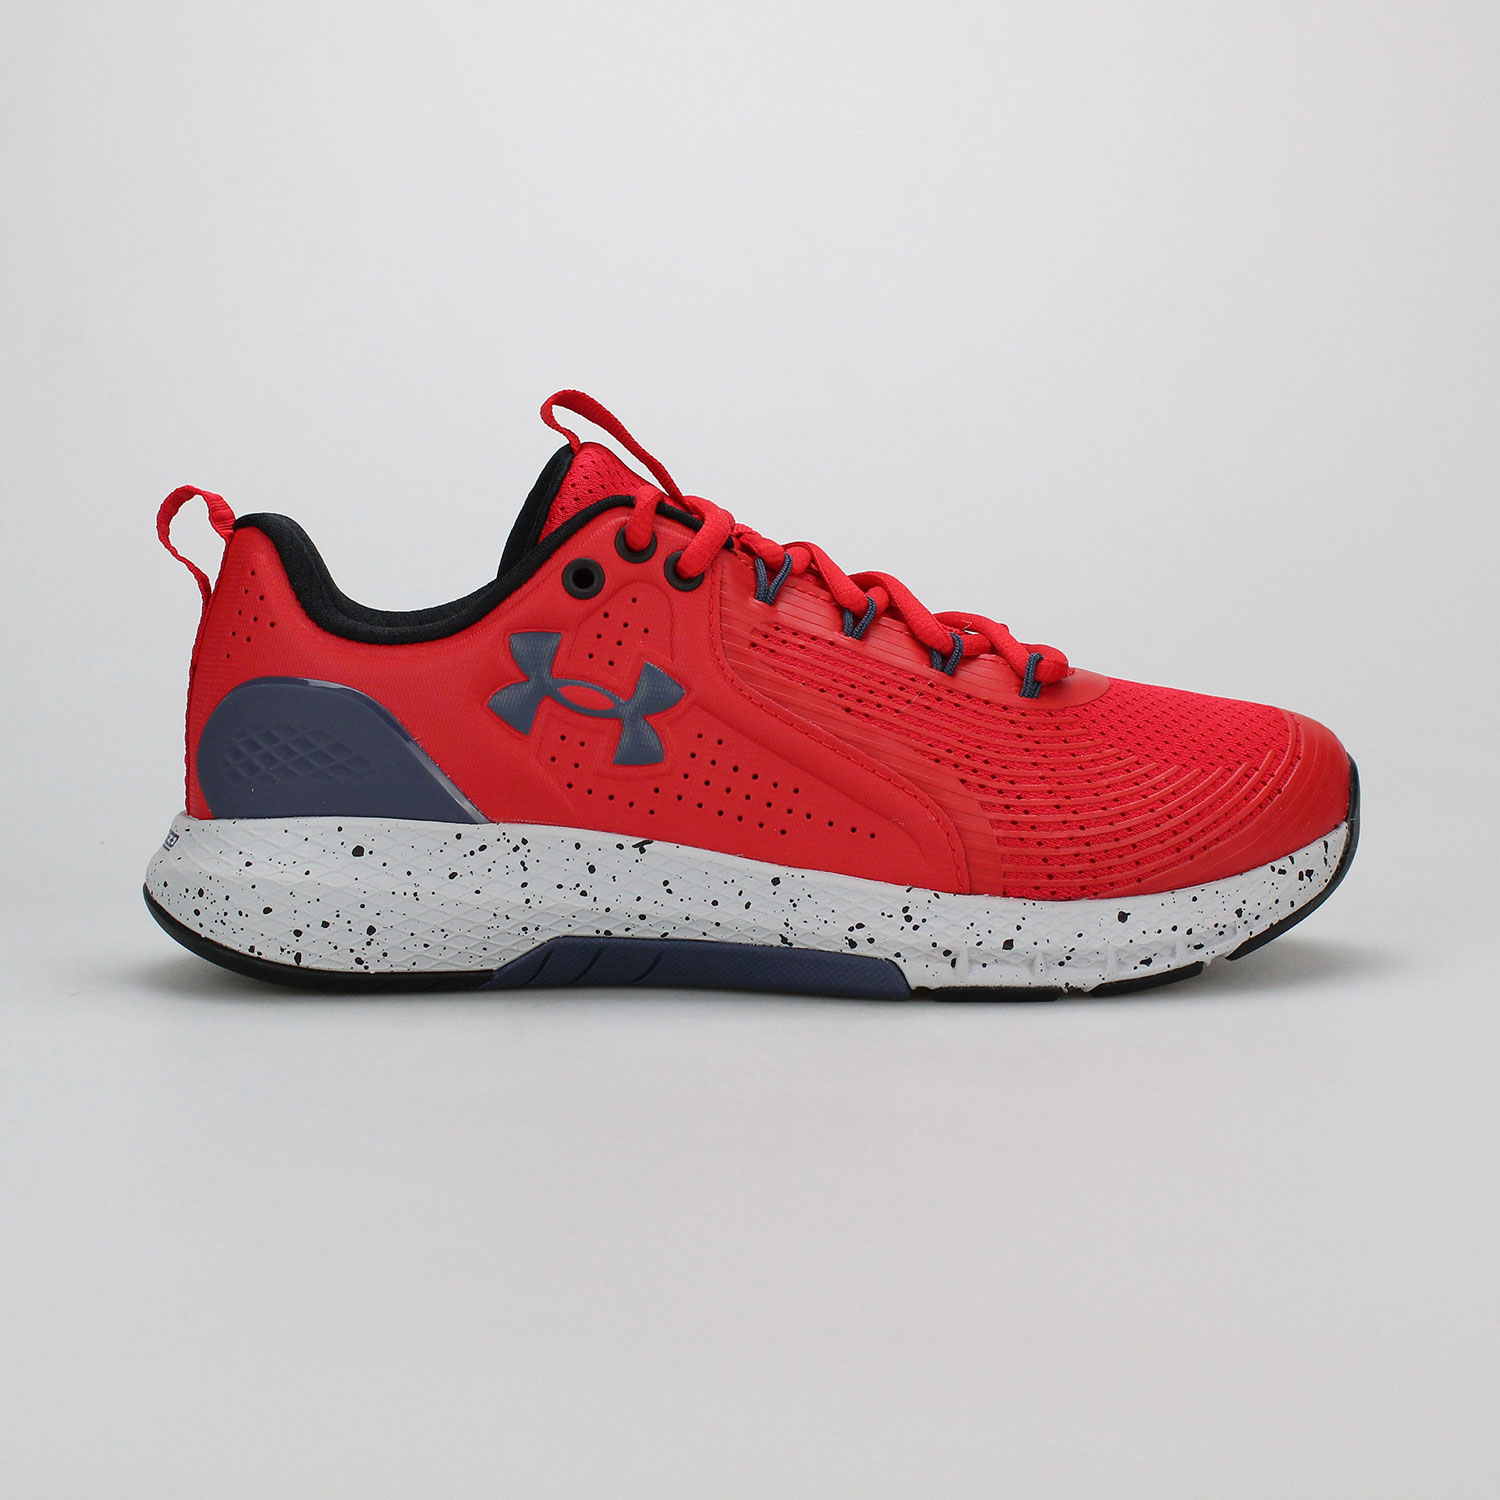 UNDER ARMOUR CHARGED COMMIT TR 3 ΚΟΚΚΙΝΟ ΑΝΔΡΙΚΑ ΡΟΥΧΑ ΚΑΙ ΠΑΠΟΥΤΣΙΑ > ΑΝΔΡΙΚΑ ΠΑΠΟΥΤΣΙΑ > ΓΥΜΝΑΣΤΗΡΙΟ